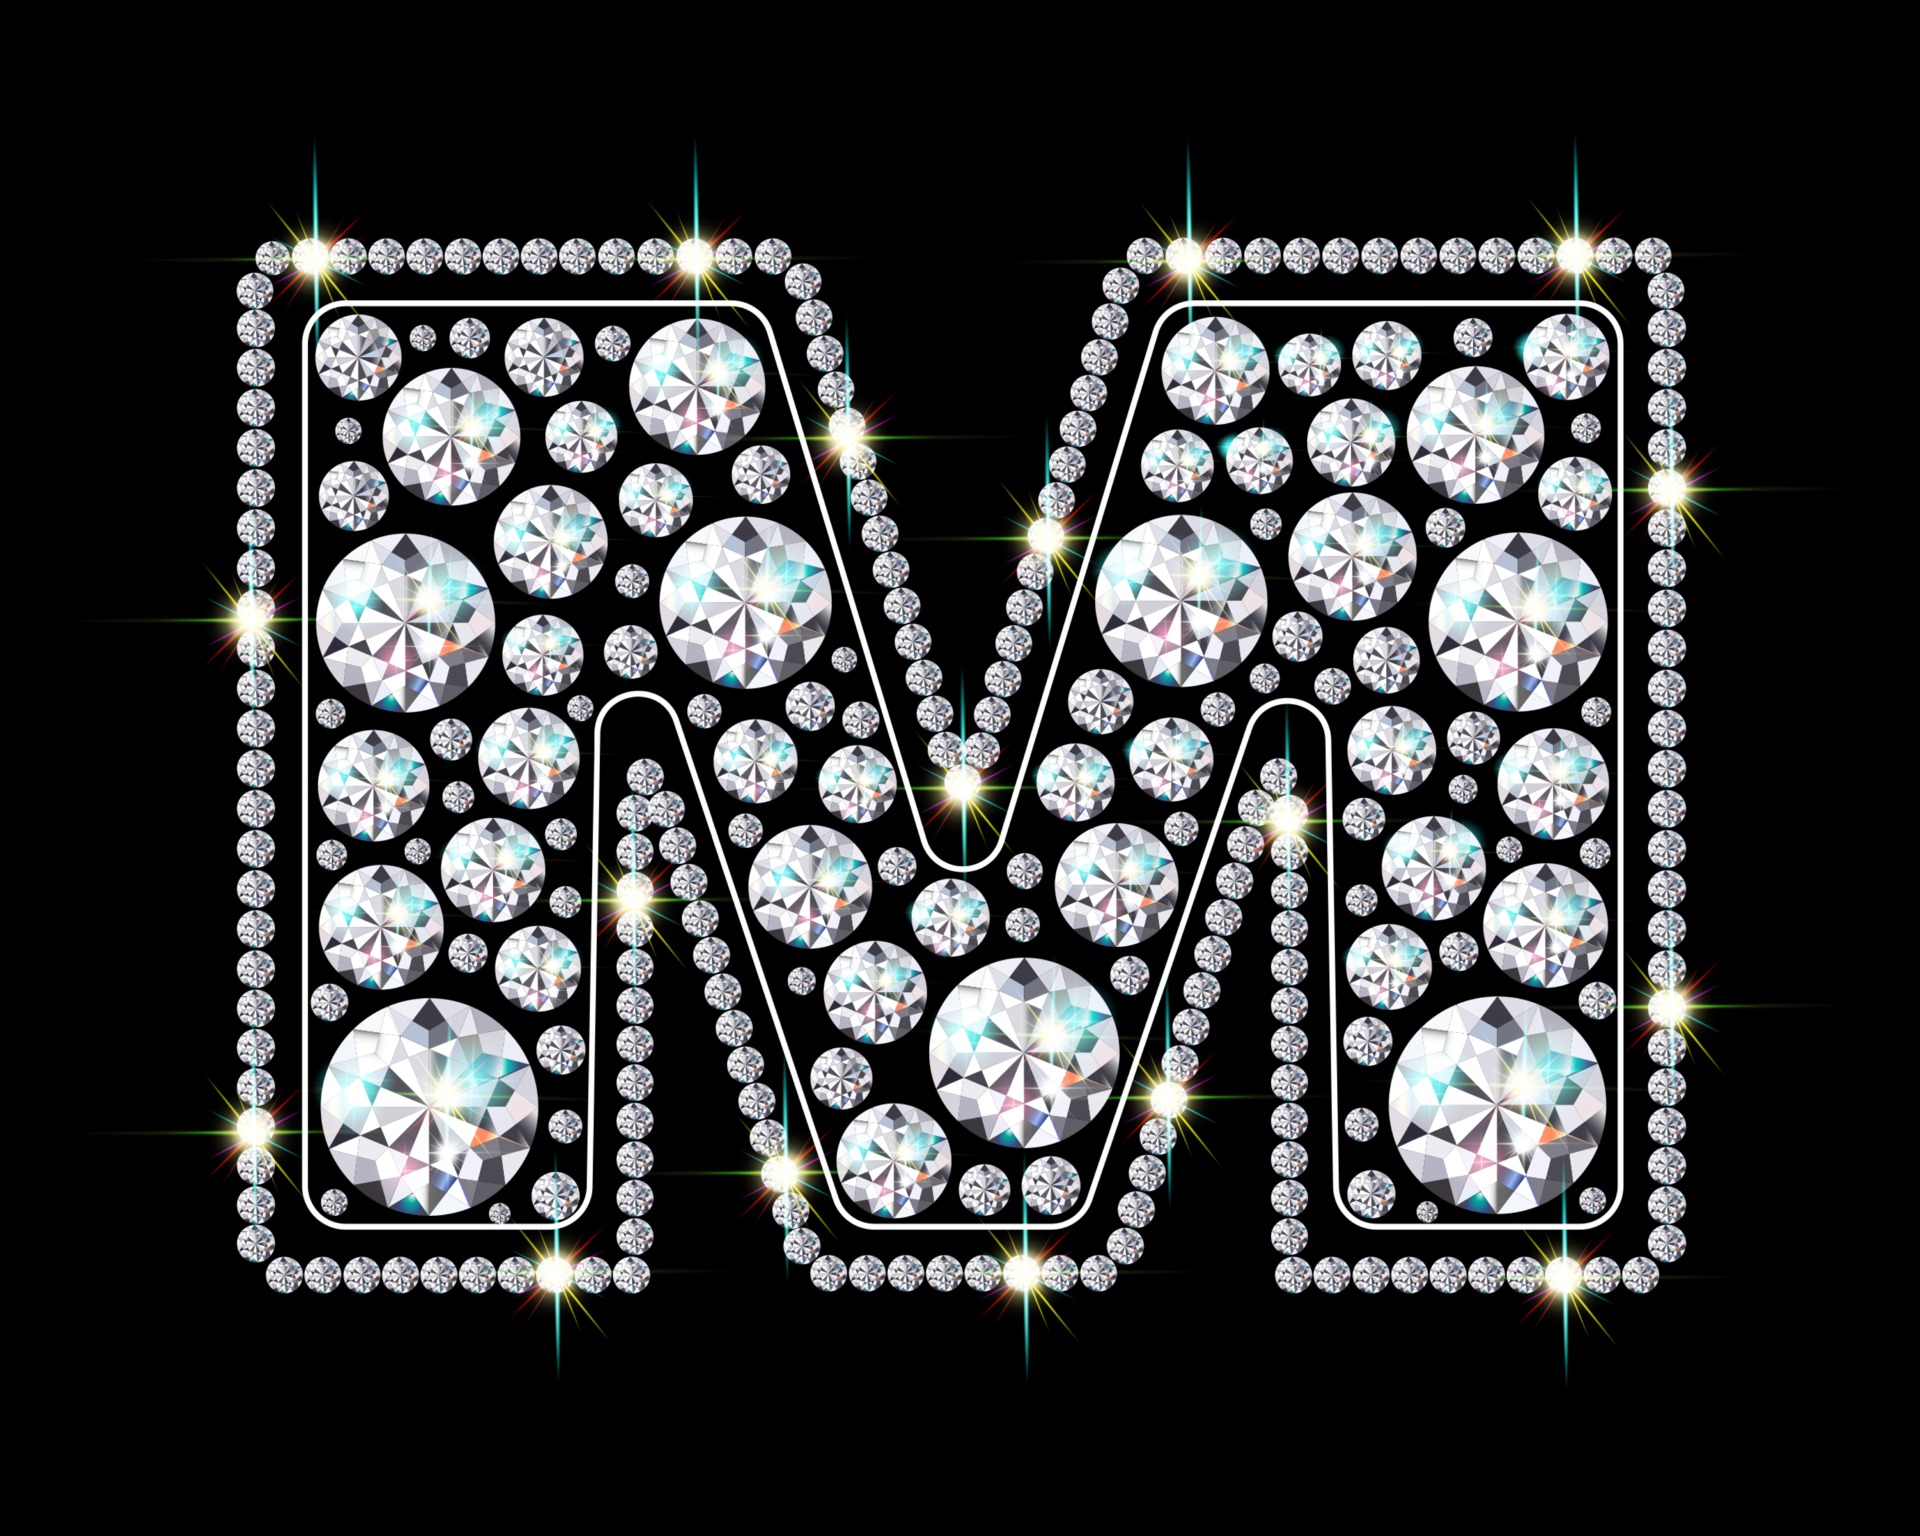 The Letter M 3d Diamond Art Illustration Stock Photo, Picture and Royalty  Free Image. Image 14413431.